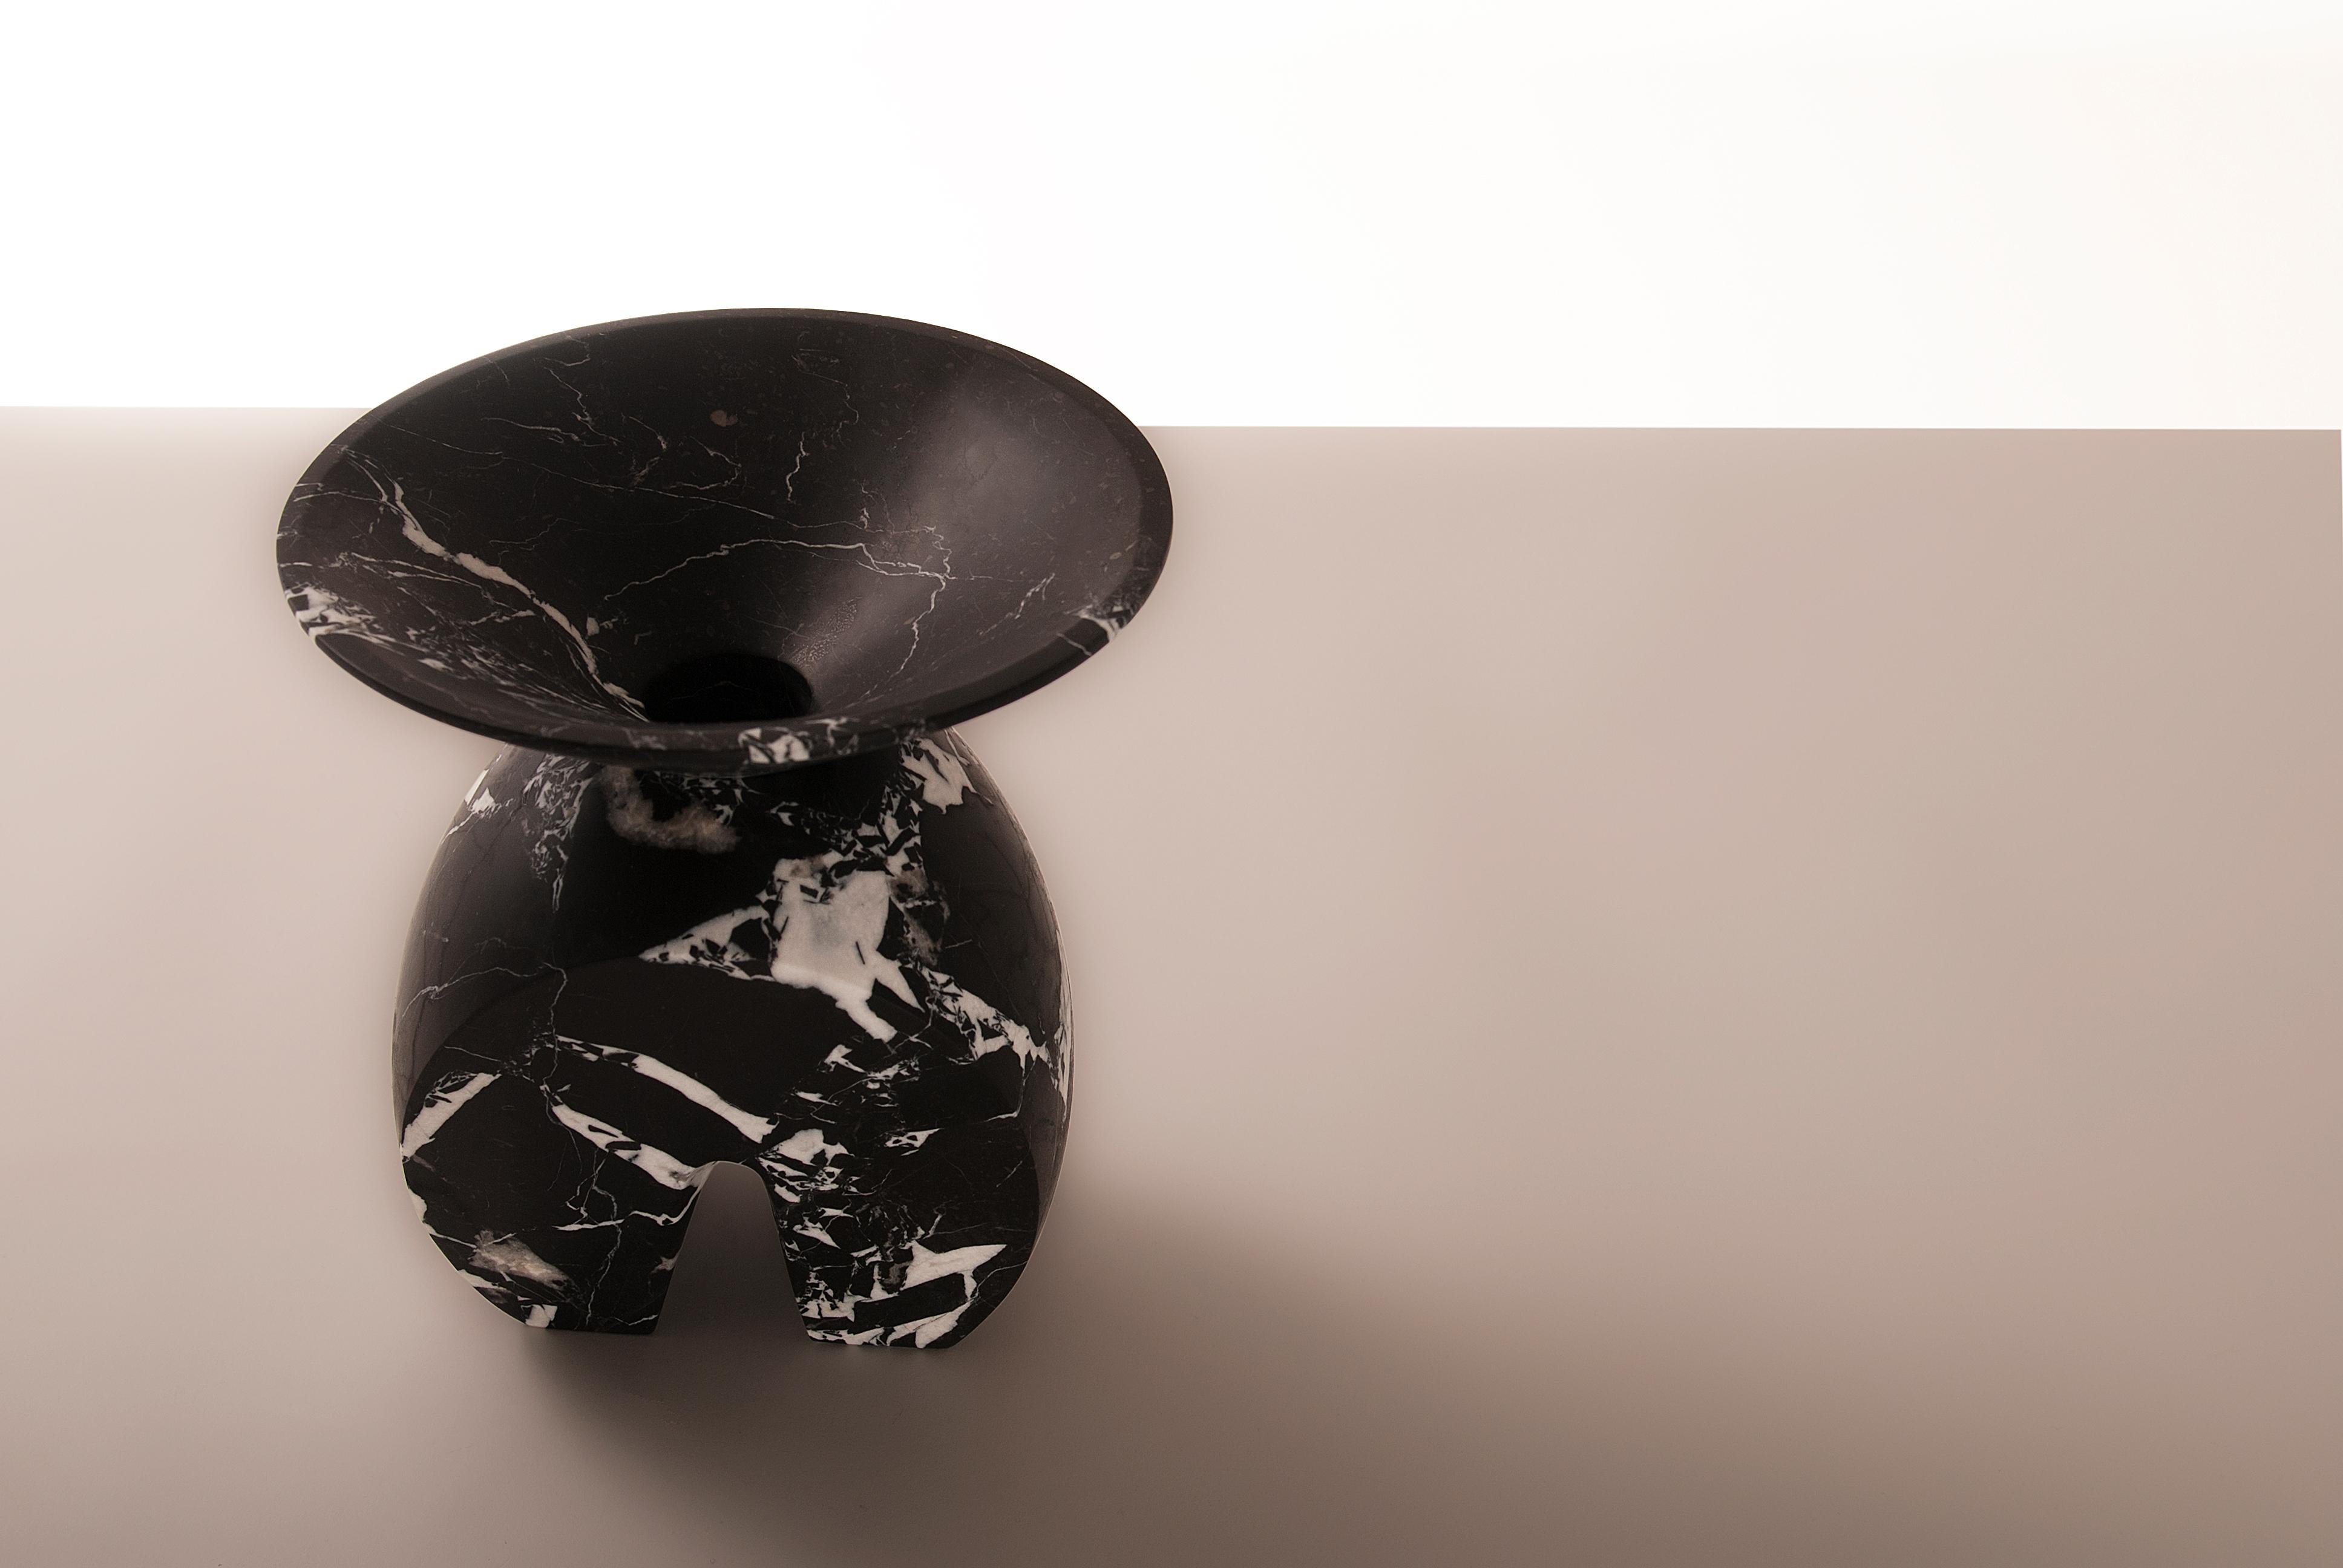 Iris, marble contemporary vase, Valentina Cameranesi
Materials: Noir antique black marble (Also available in White Carrara)
Dimensions: 26 x 24 x 24 cm.

The “Avalon” series consists of 3 sculptural vases, made of White Arabescato marble or